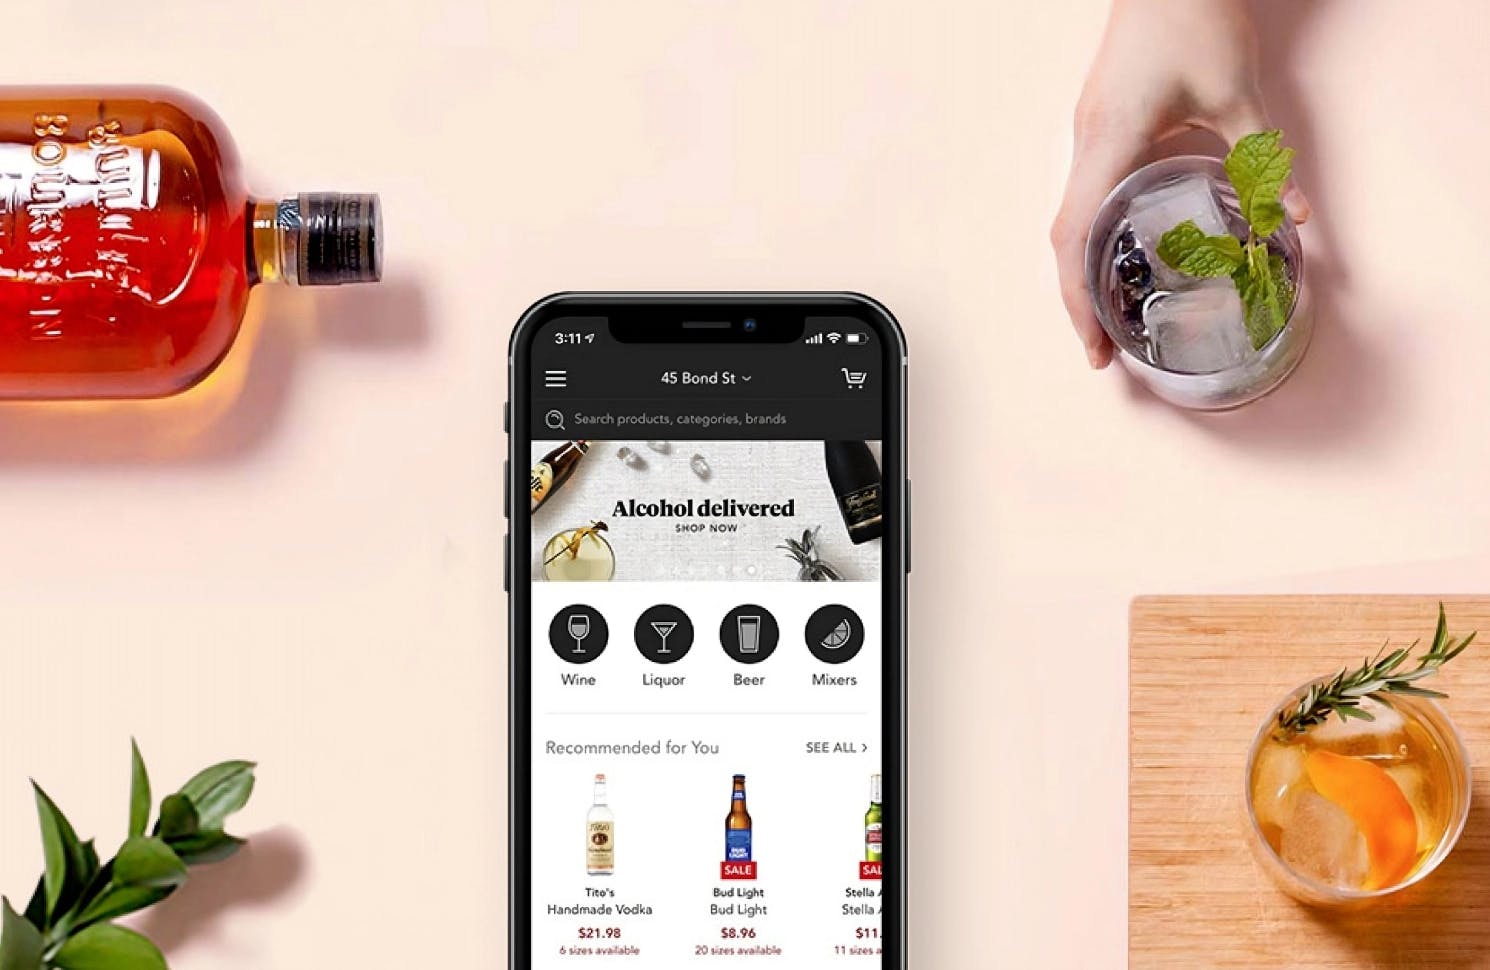 Compilation photo of the Minibar app, a bottle of liquor, and some drinks